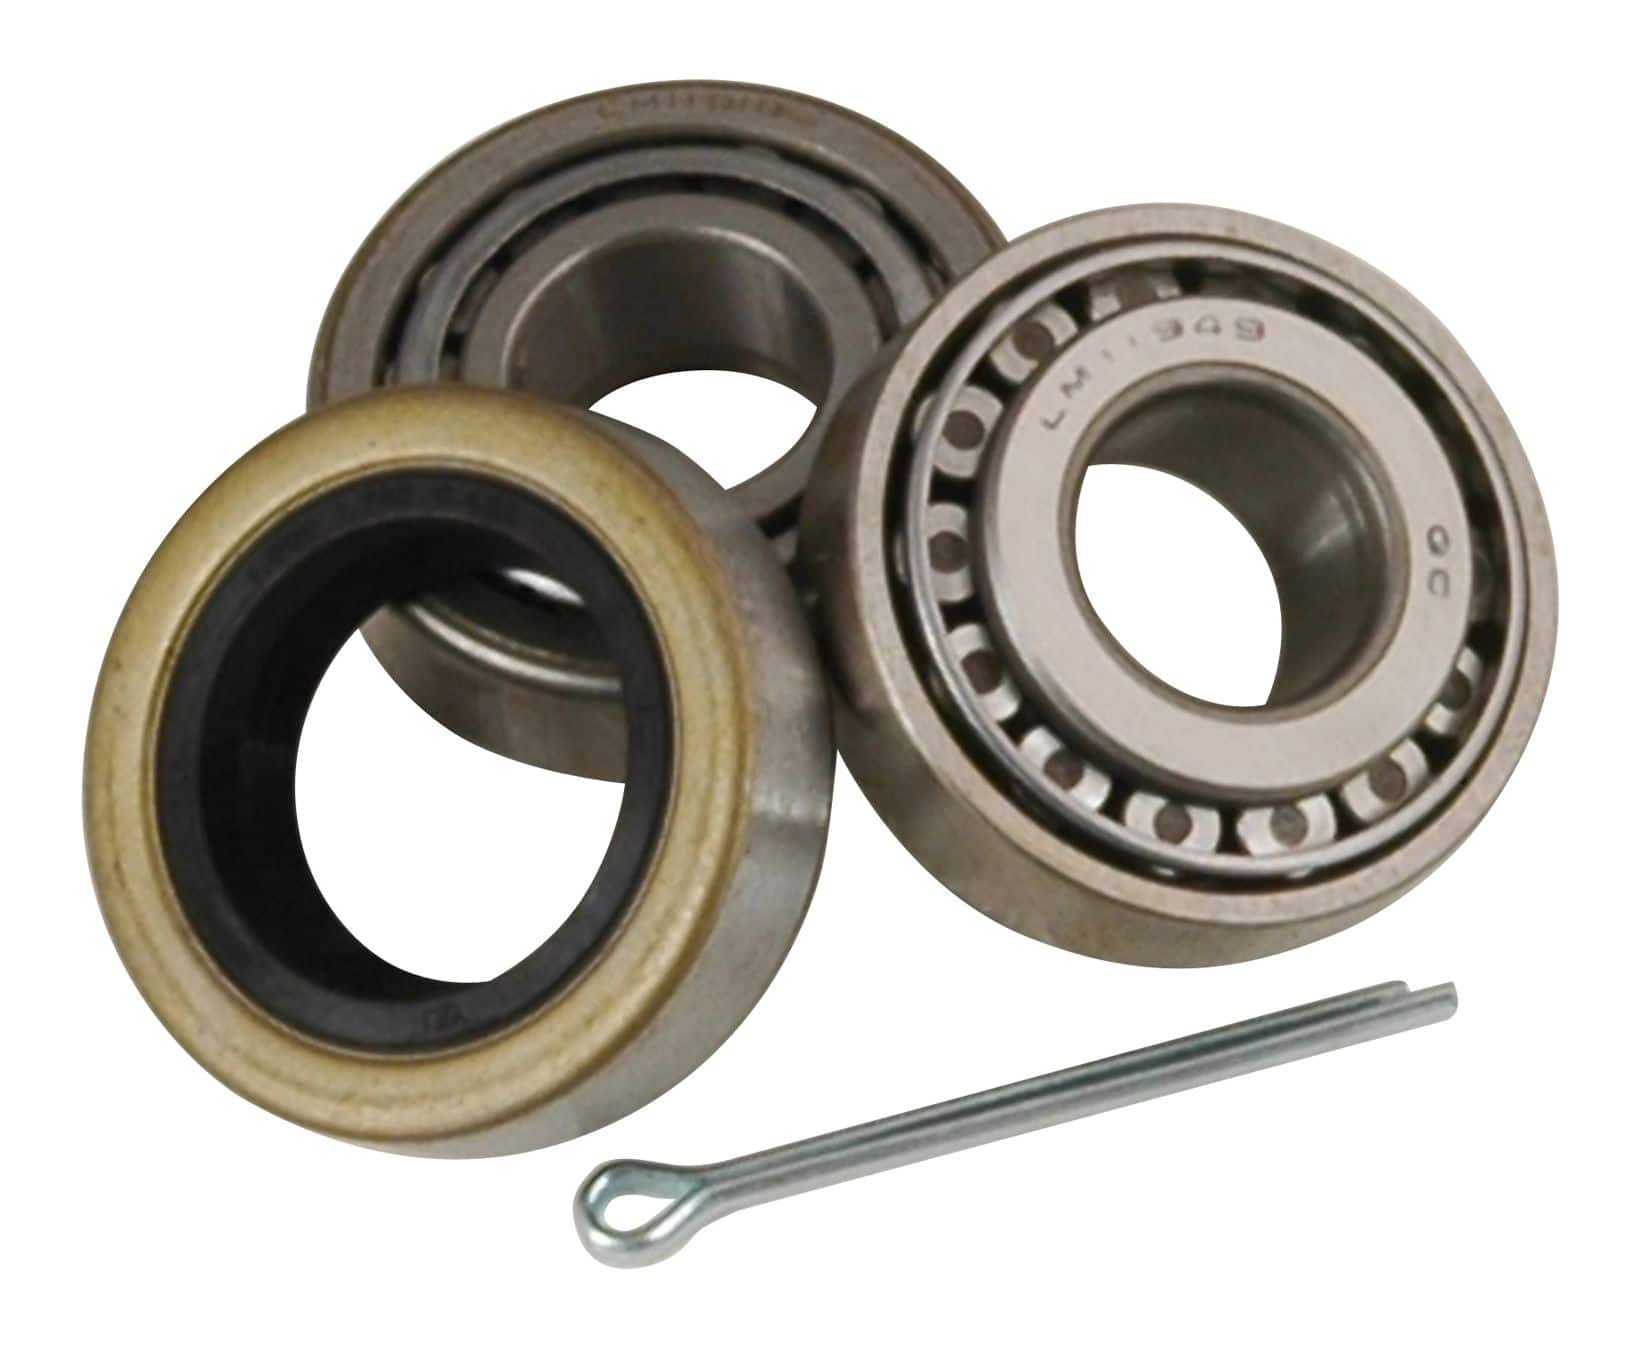 Trailer Axle Spindle for 1 x 1 -44643 Bearings